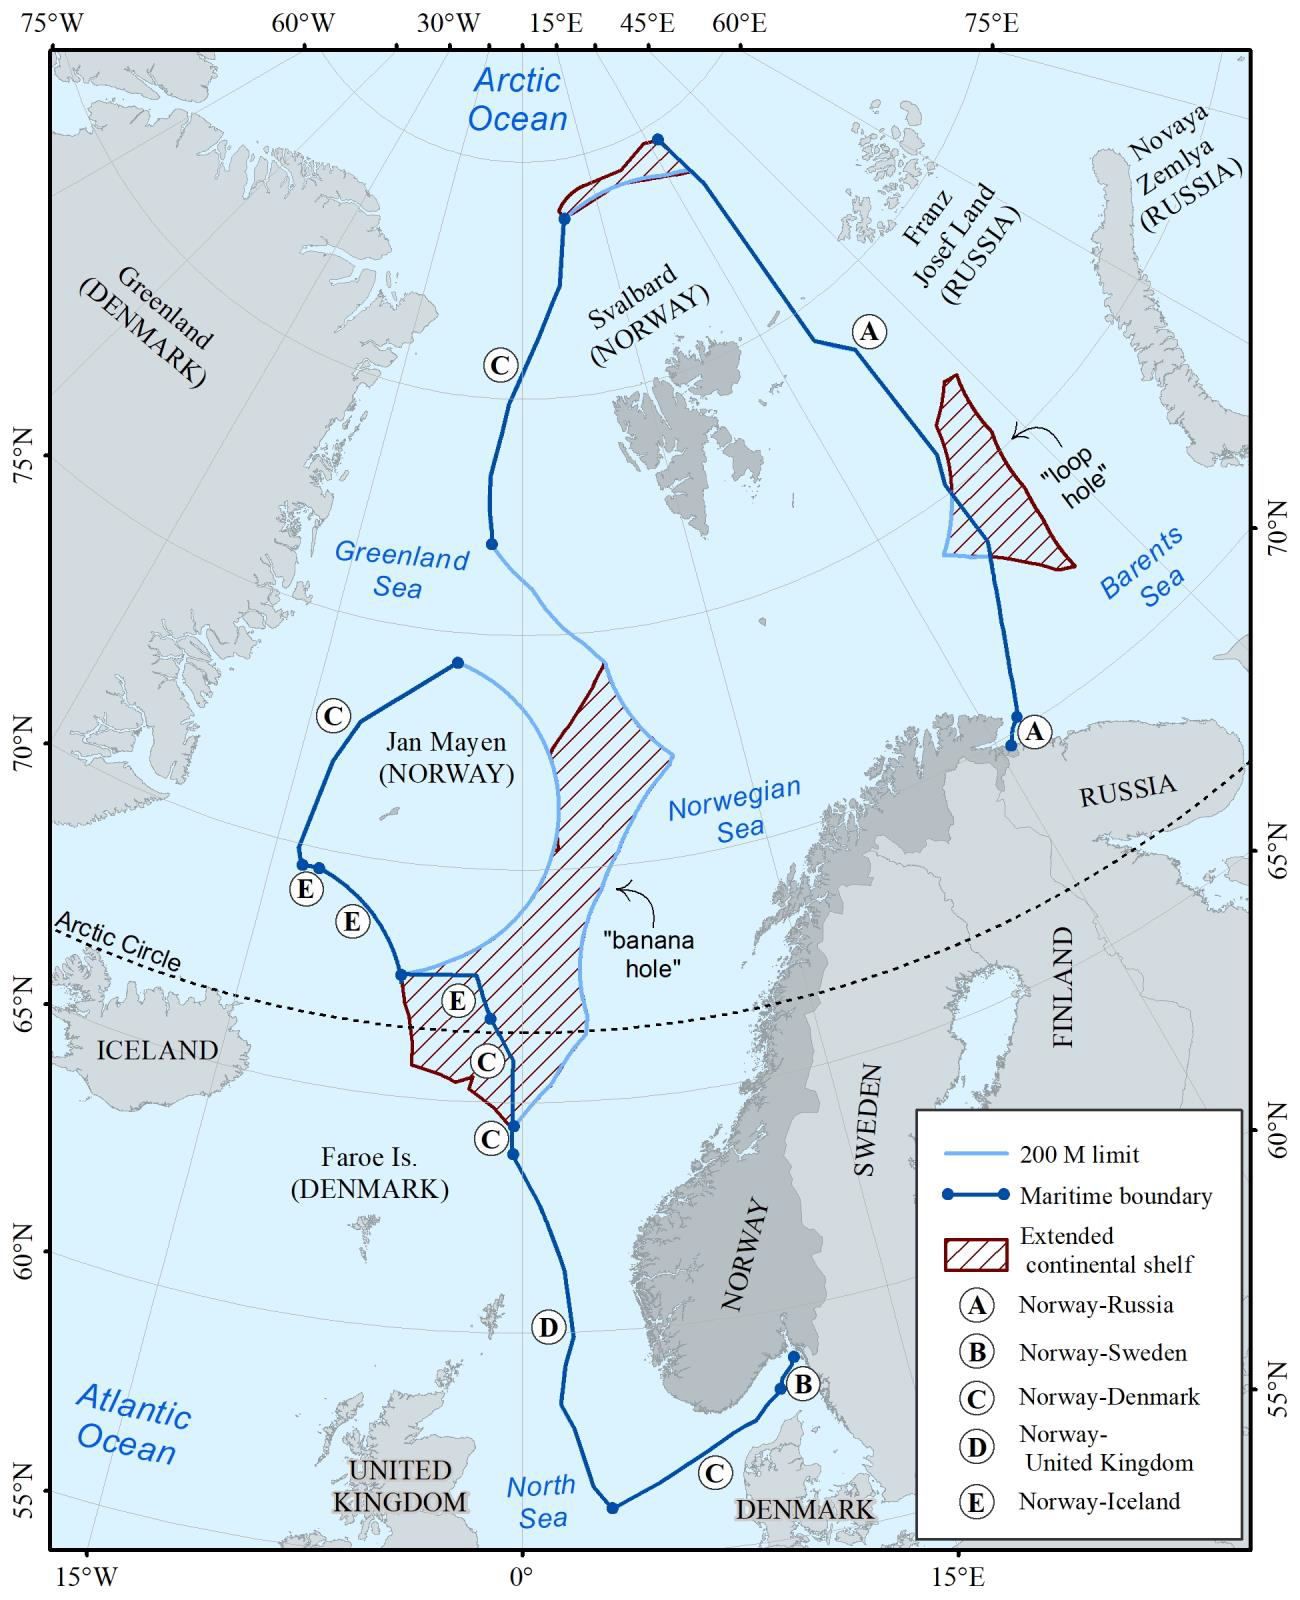 Norway maritime claims about outer limits of the territorial sea around mainland Norway, Svalbard and Jan Mayen and extent of the territorial sea around mainland Norway(2003)